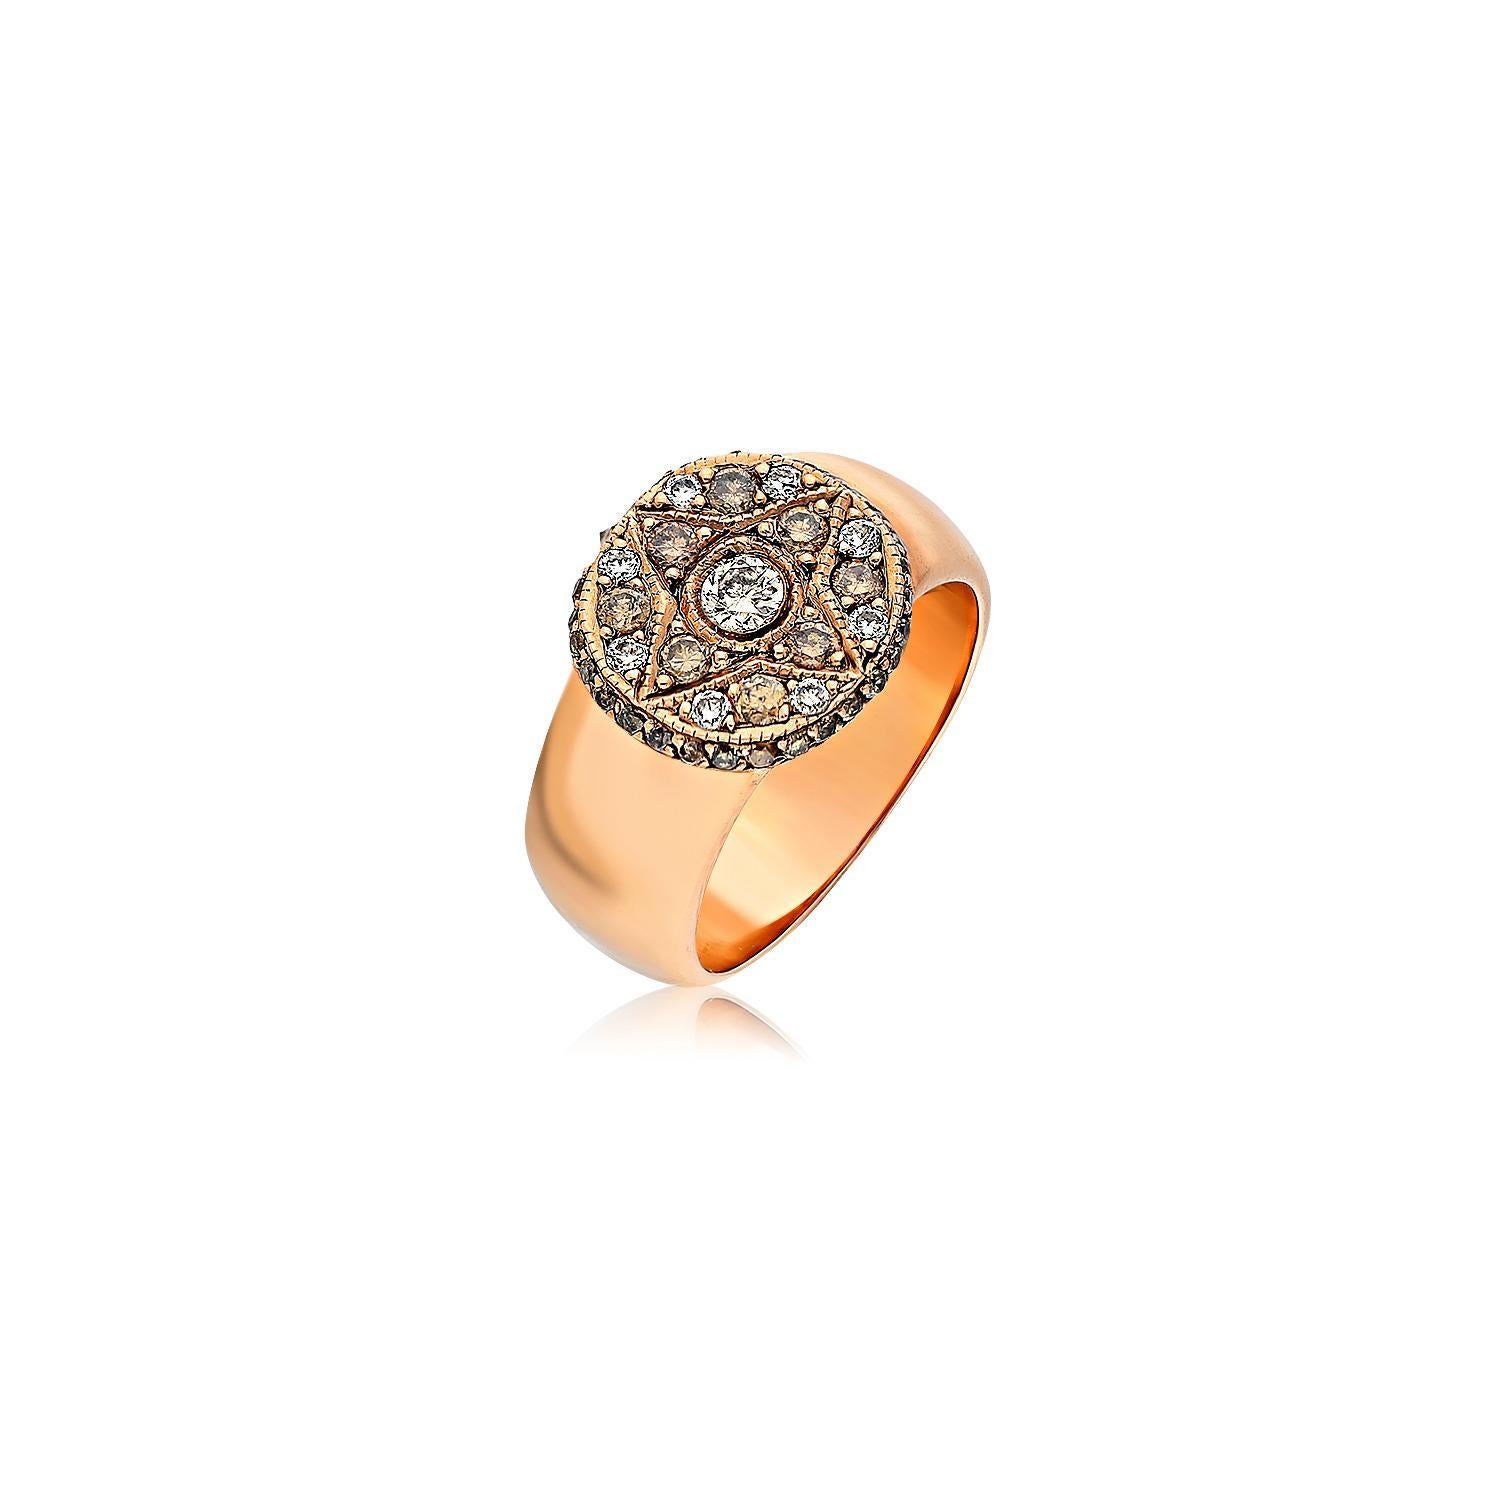 For Sale:  8k Gold Round Ring with Pave Brilliant Cut Diamonds 4